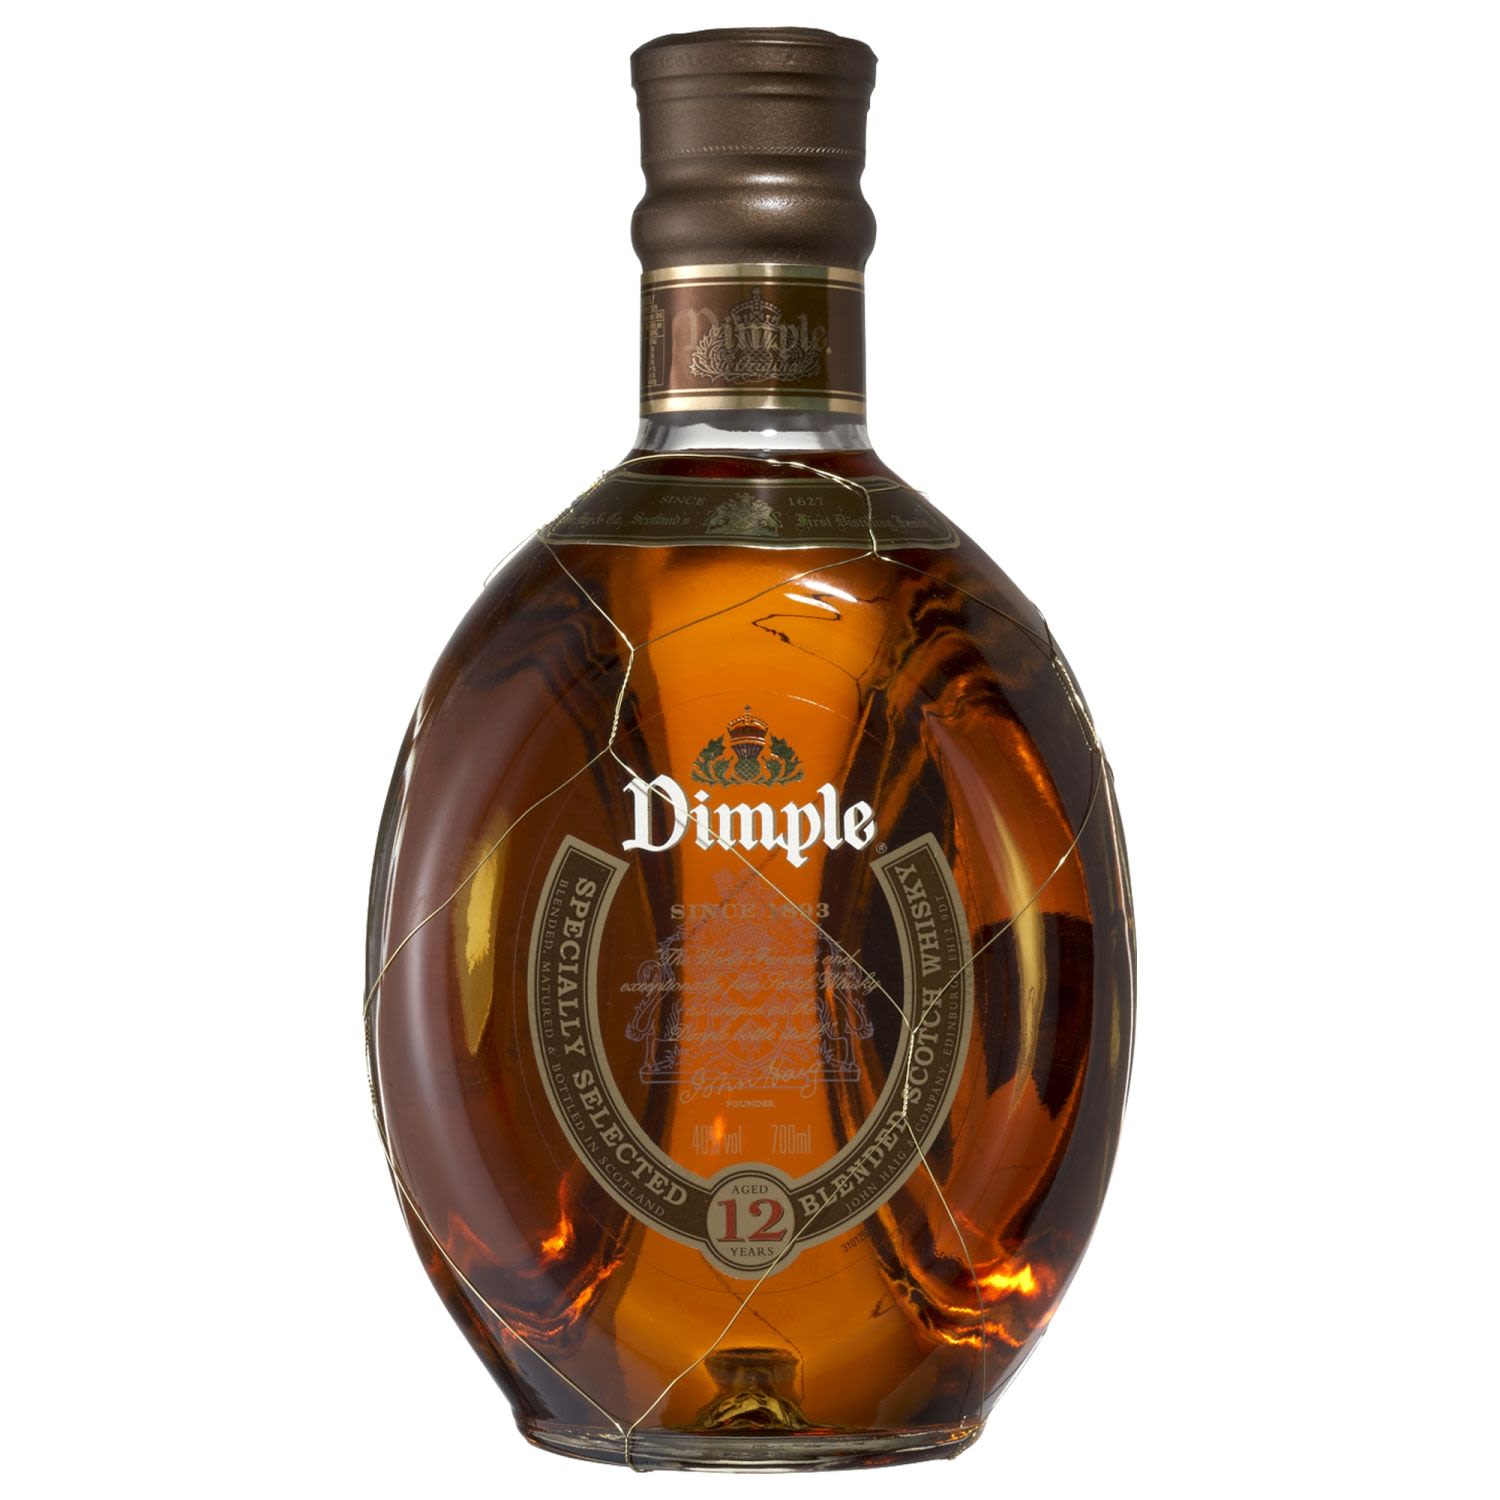 Dimple 12 Year Old Blended Scotch Whisky 700mL Bottle